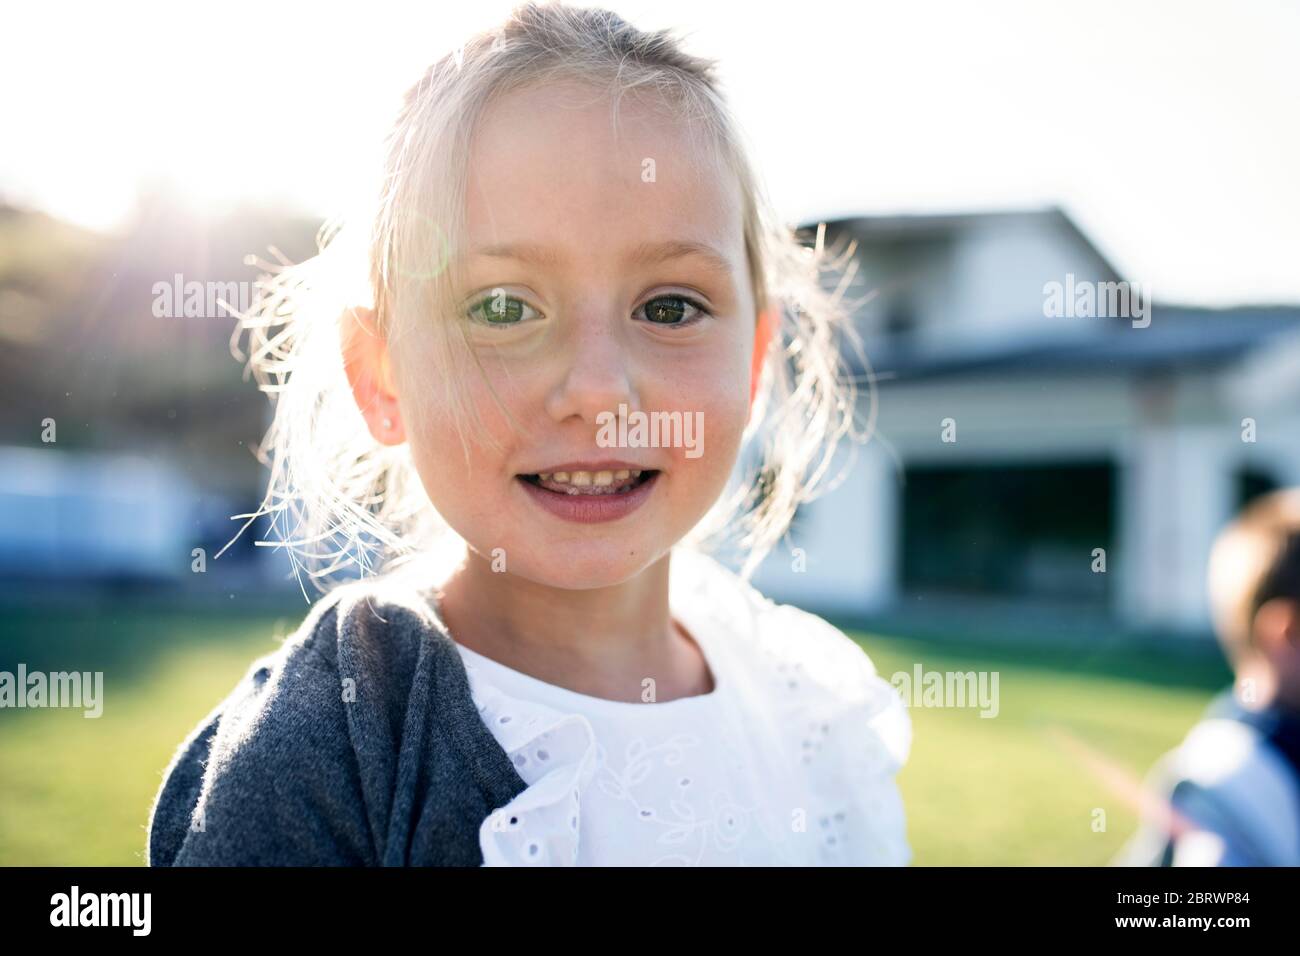 Front view of small girl standing outdoors, looking at camera. Stock Photo